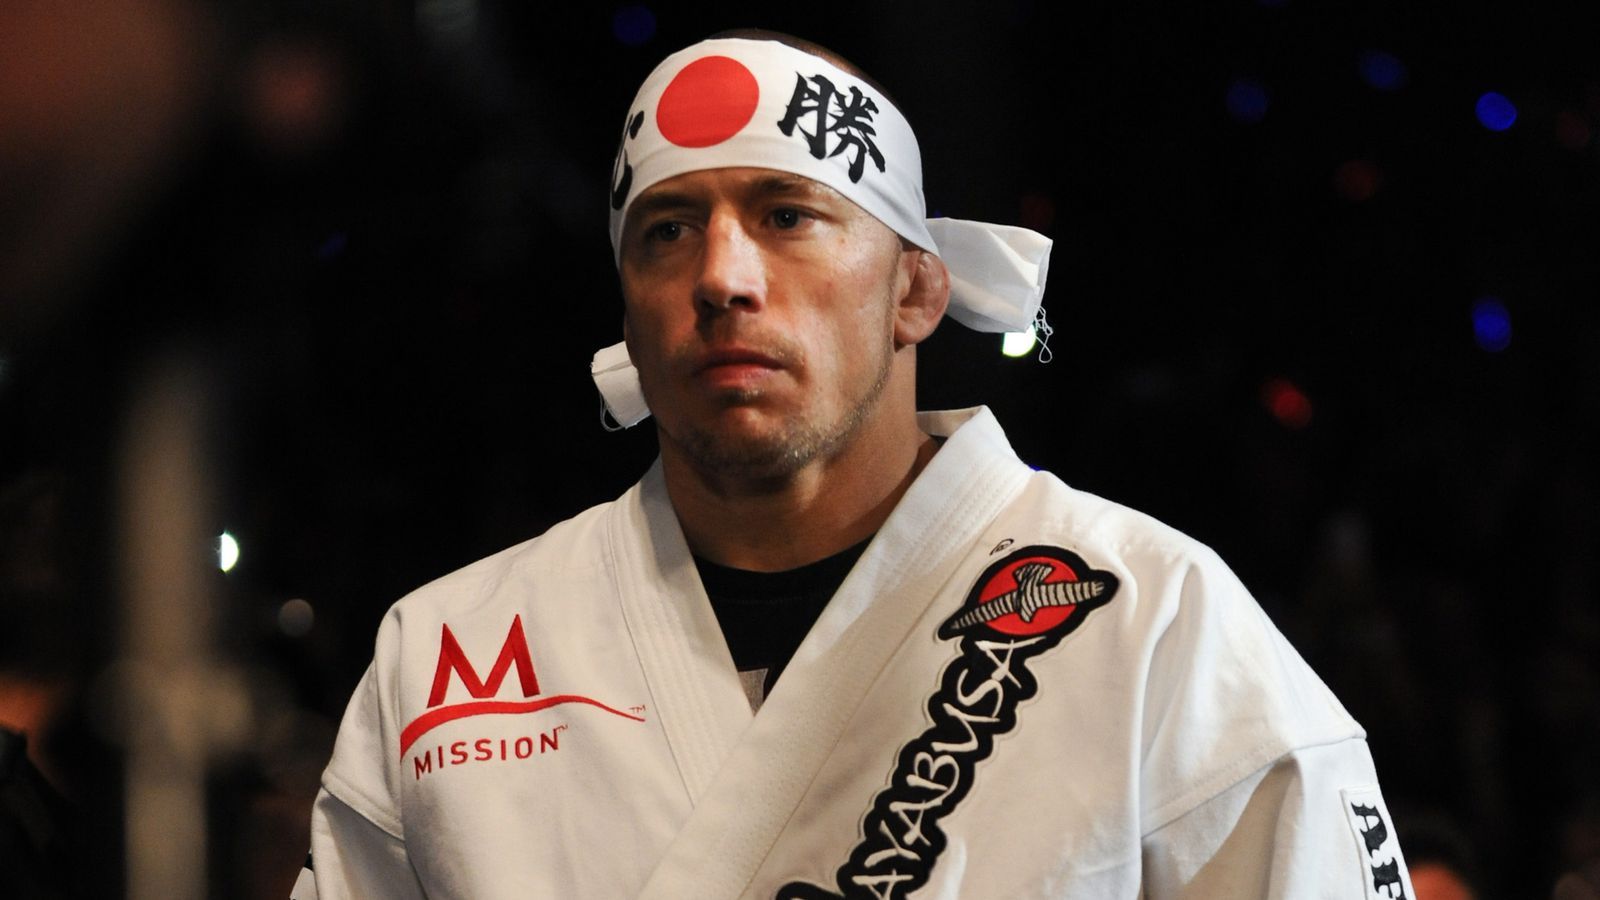 Georges St. Pierre retirement: I'm going crazy, can't sleep, have issues, and need to get away